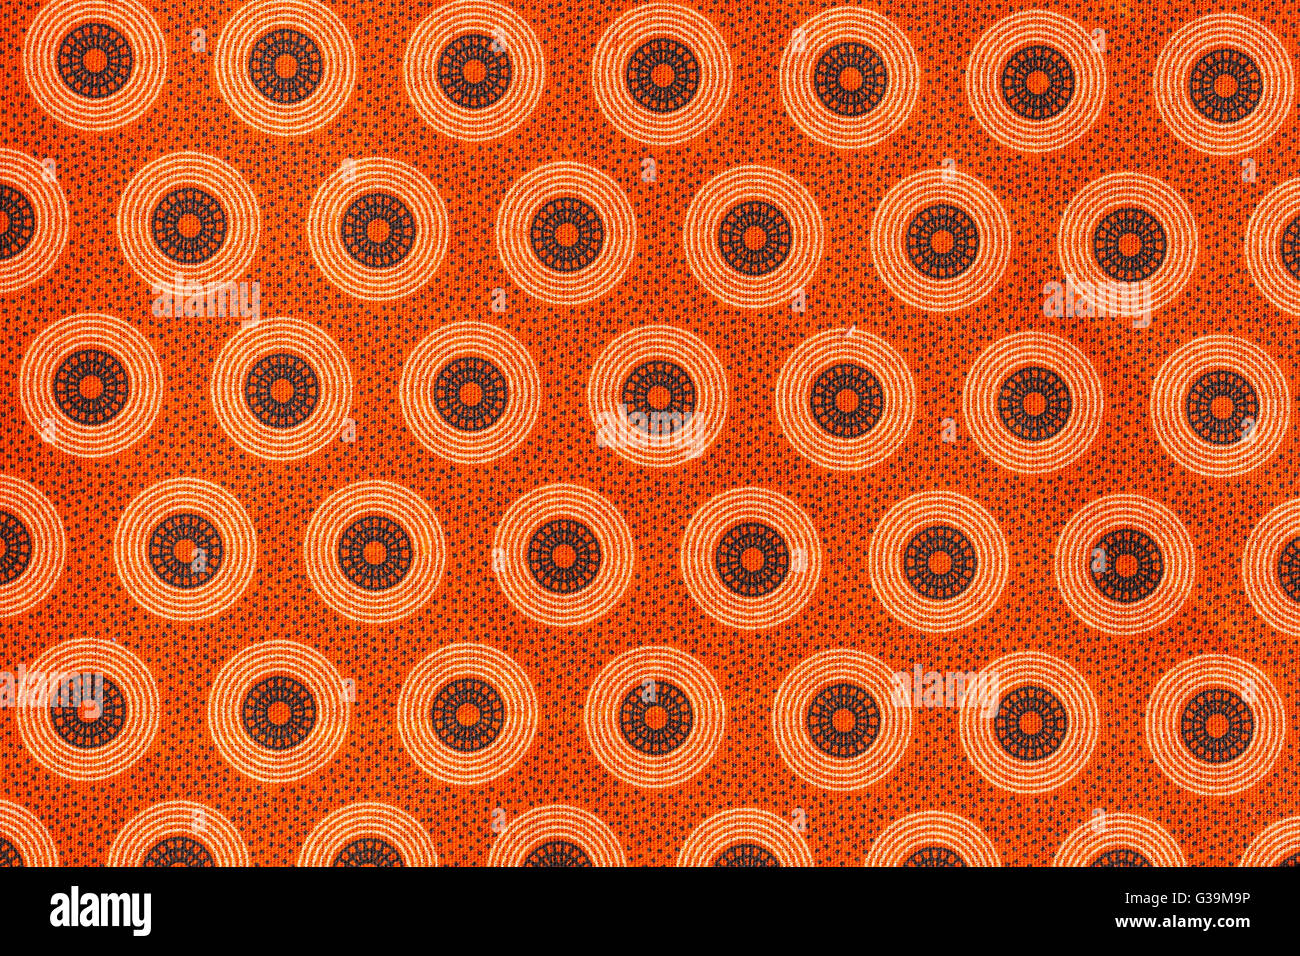 Closeup of a calico cotton fabric with a printed geometric design called seshweshwe - used in traditional Sotho woman's dresses Stock Photo